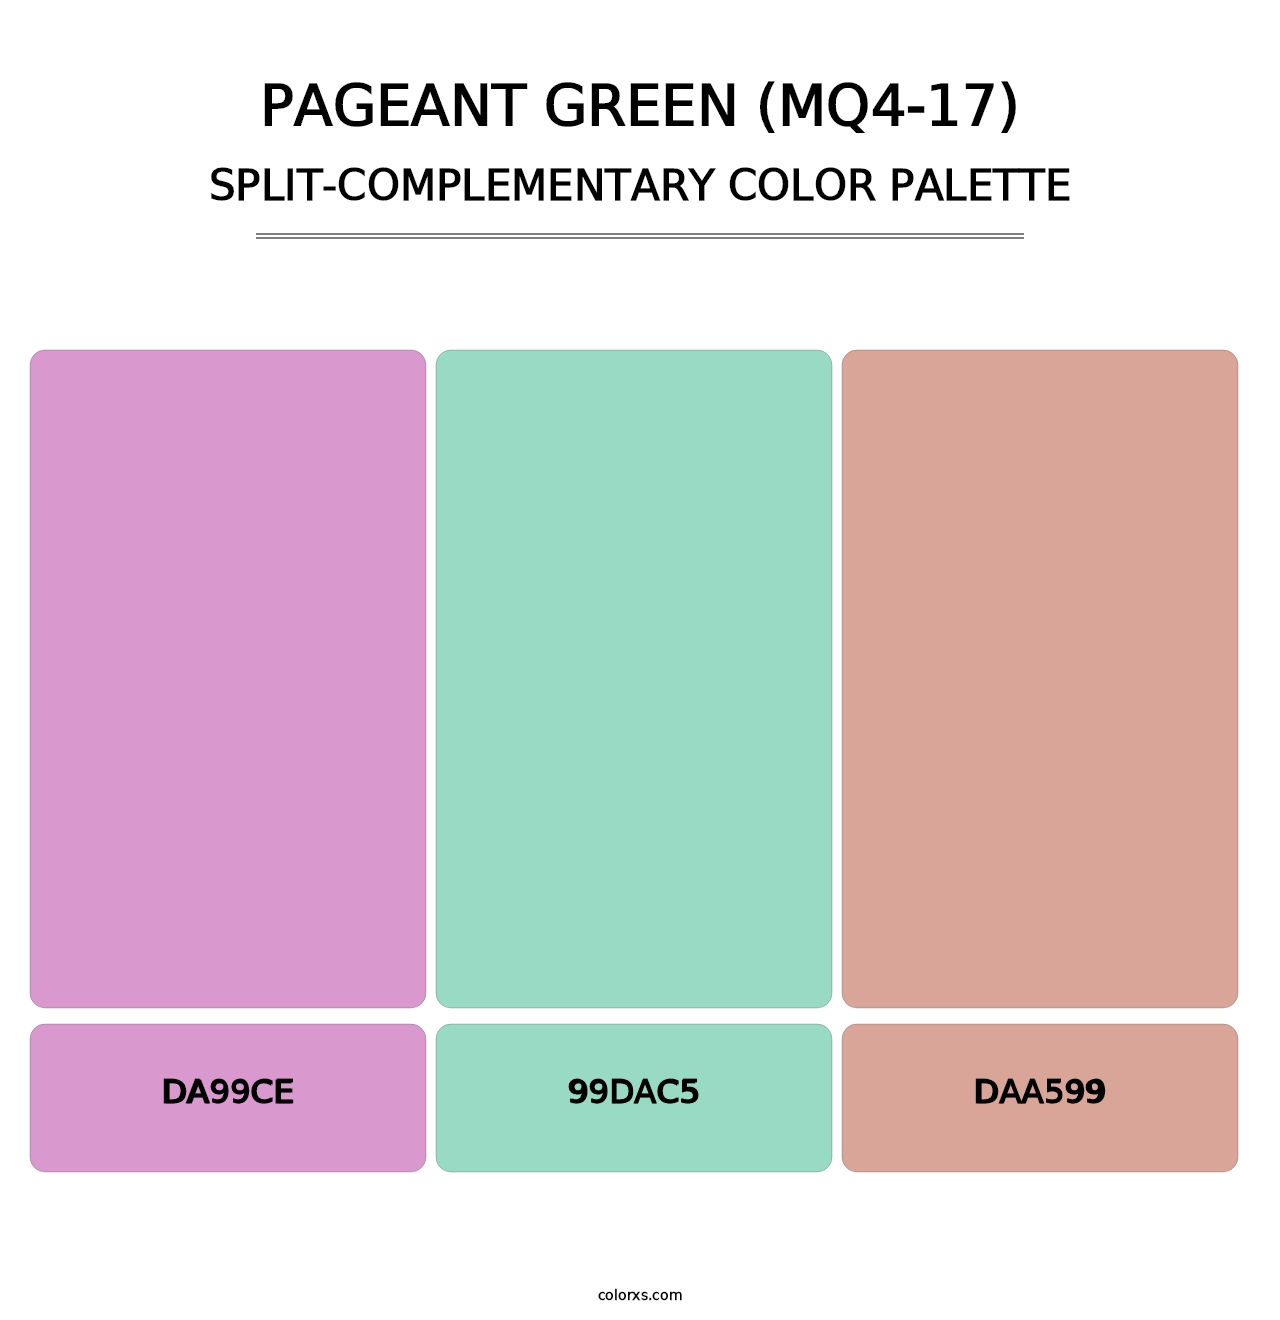 Pageant Green (MQ4-17) - Split-Complementary Color Palette